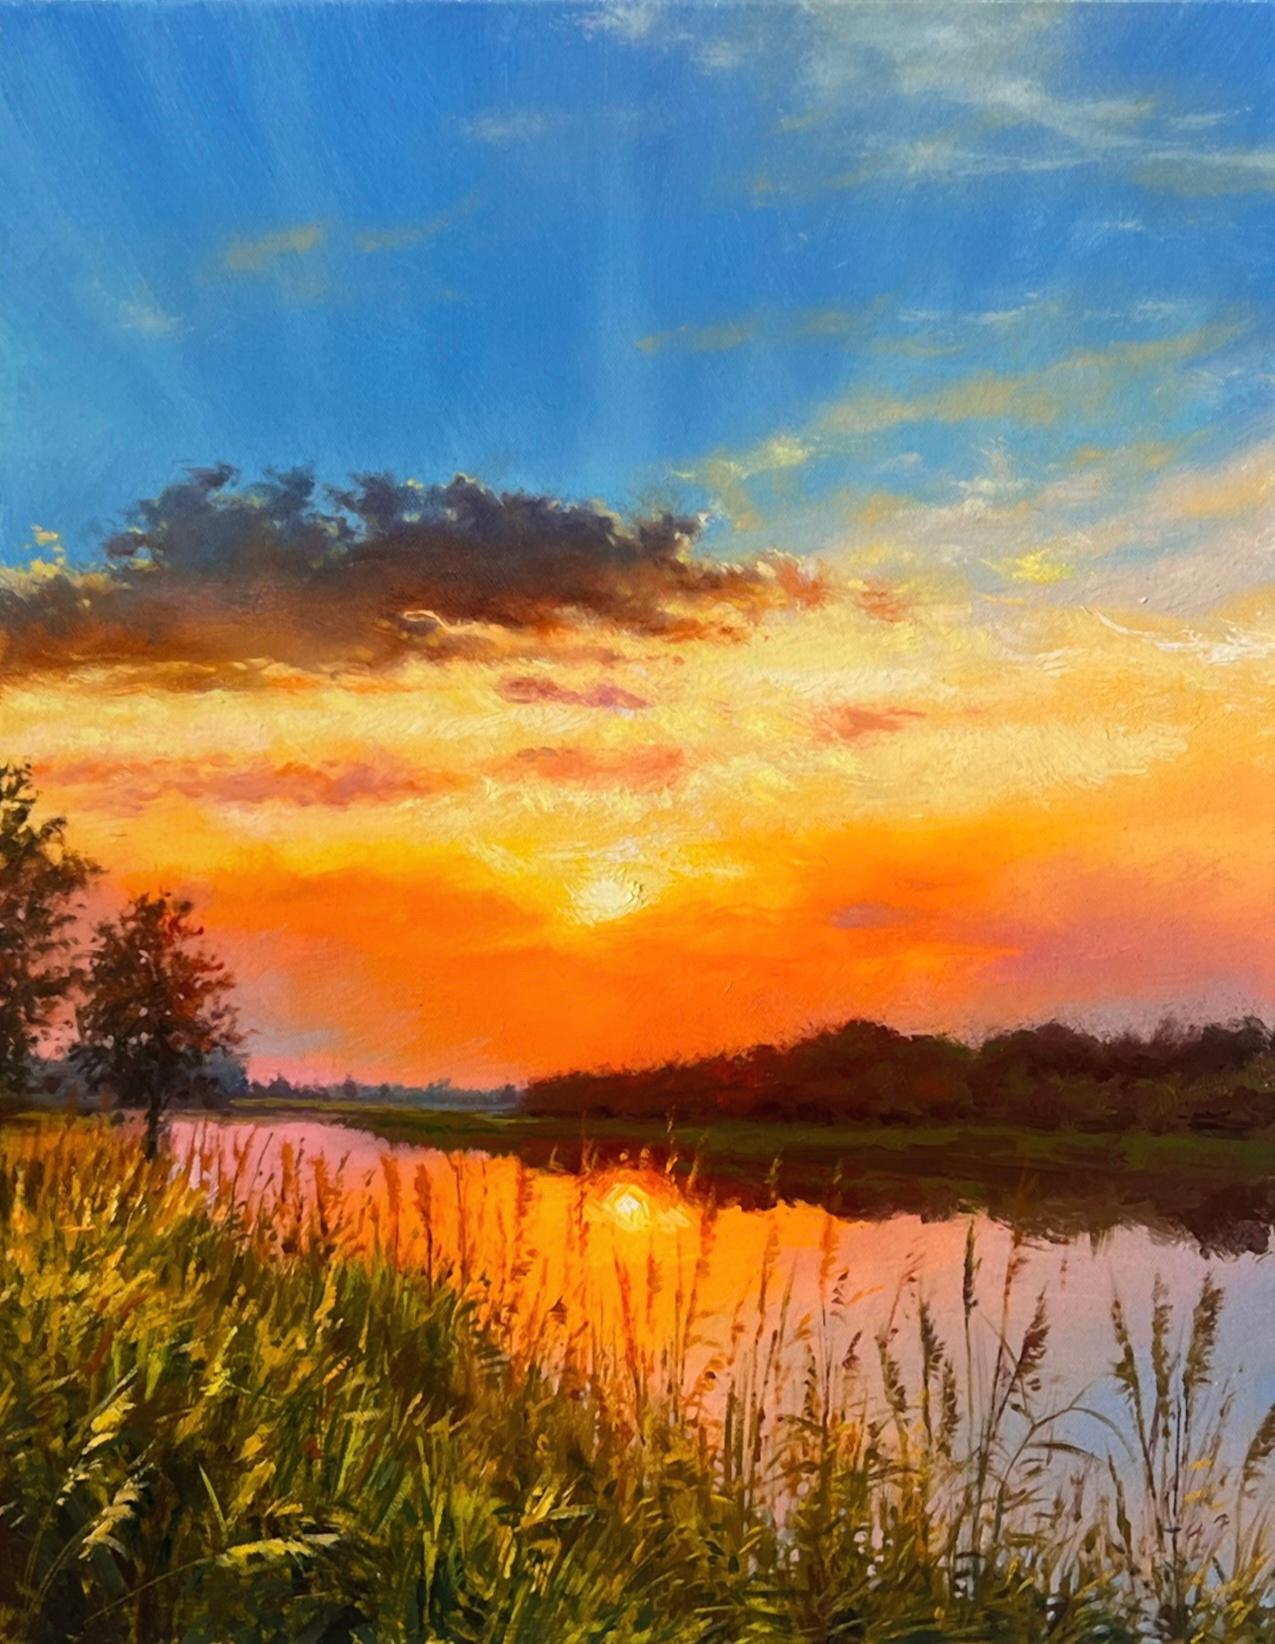 Reflections of Serenity, Oil Painting - Art by Jose Luis Bermudez